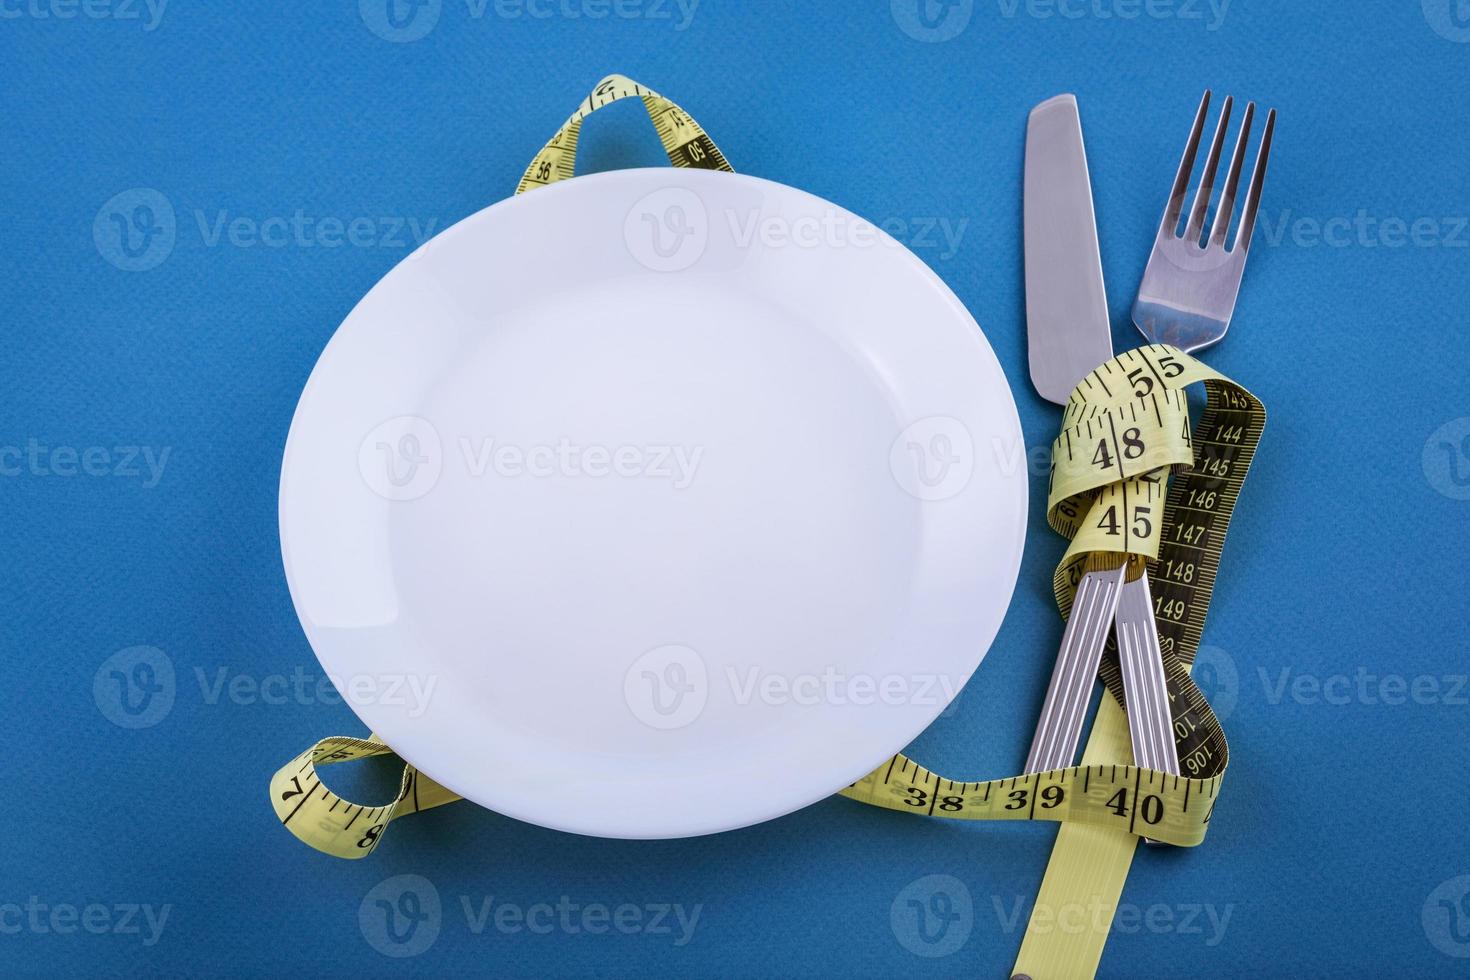 White plate on a blue background, measuring tape with a fork and knife photo